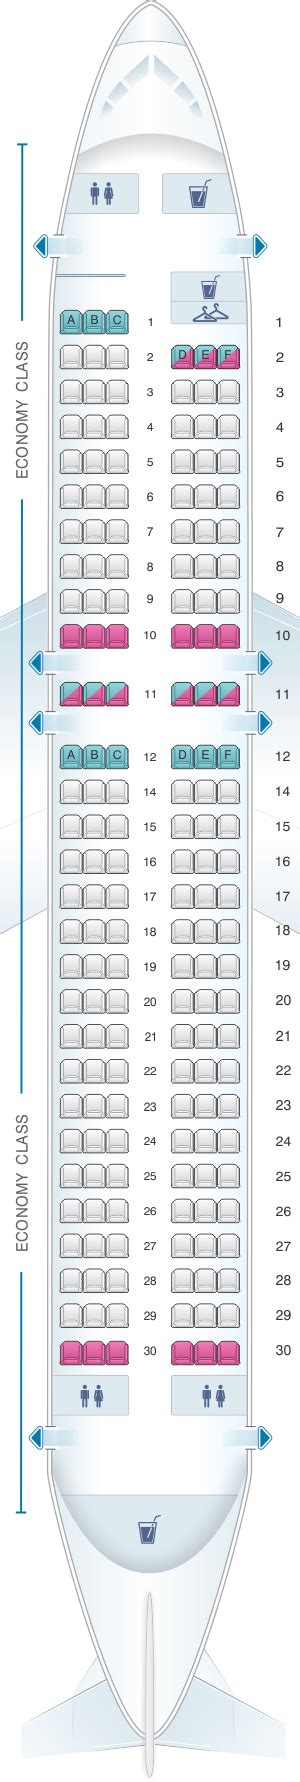 Seat Map Airbus A320 200 Vueling Best Seats In The Plane Images And